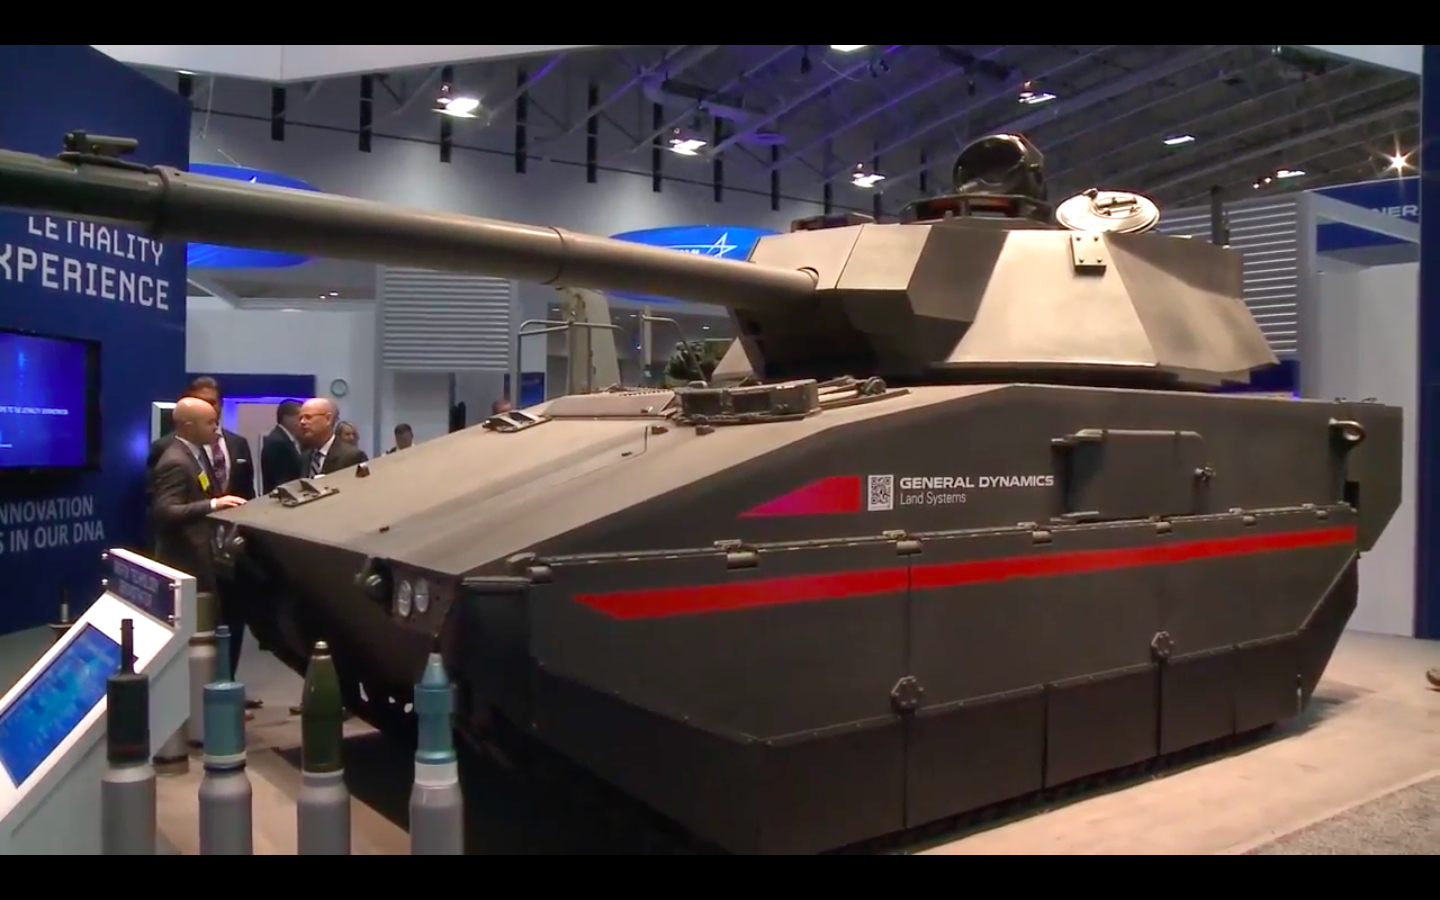 General Dynamics Griffin: Don’t Call It A Tank (It’s Totally A Tank)